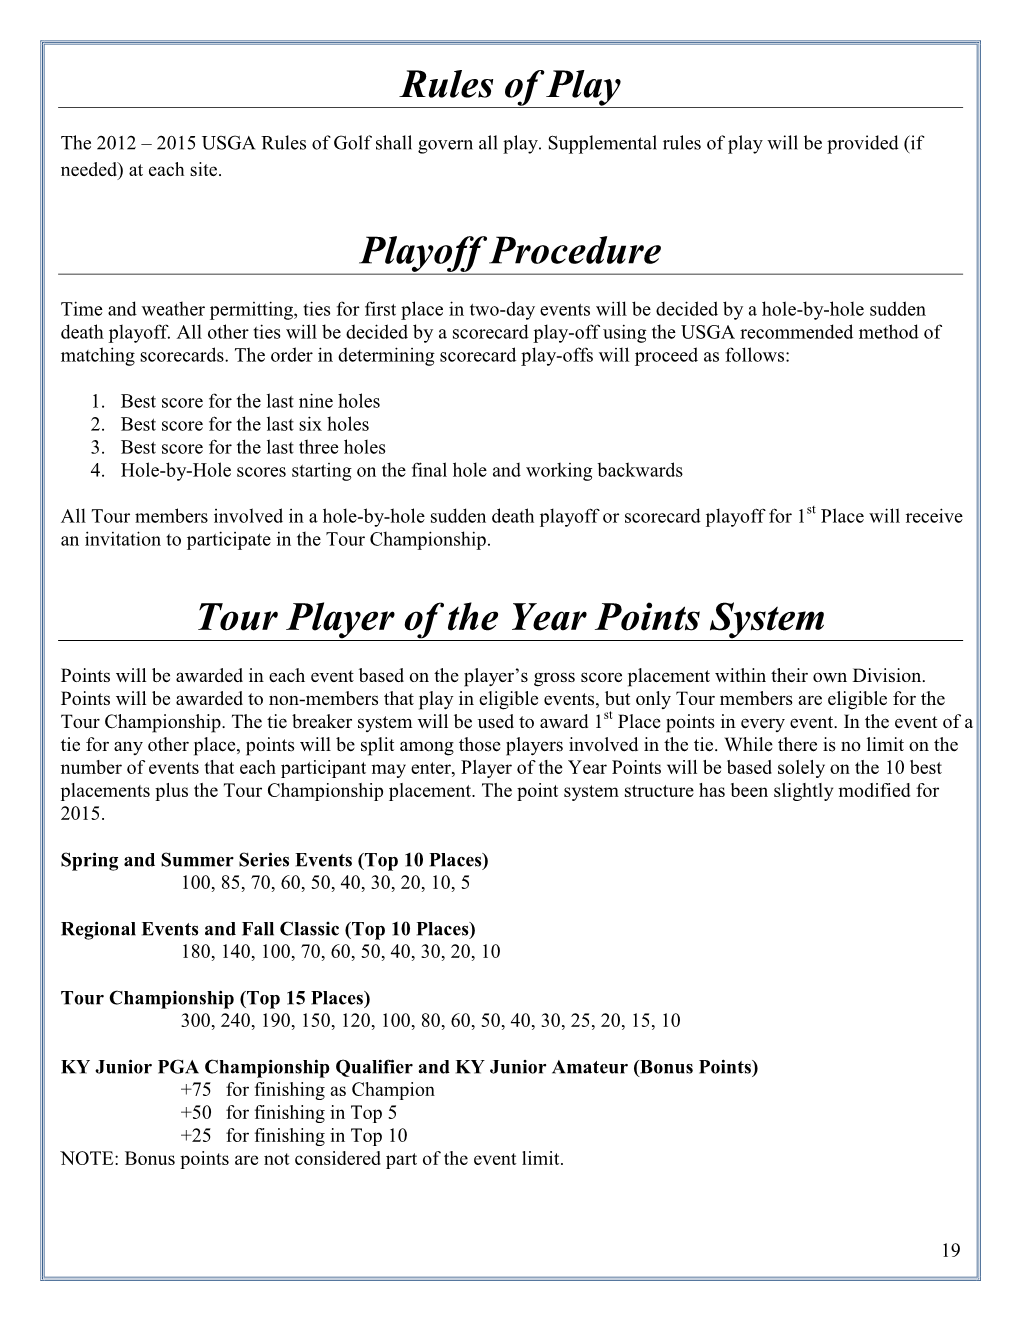 Rules of Play Playoff Procedure Tour Player of the Year Points System